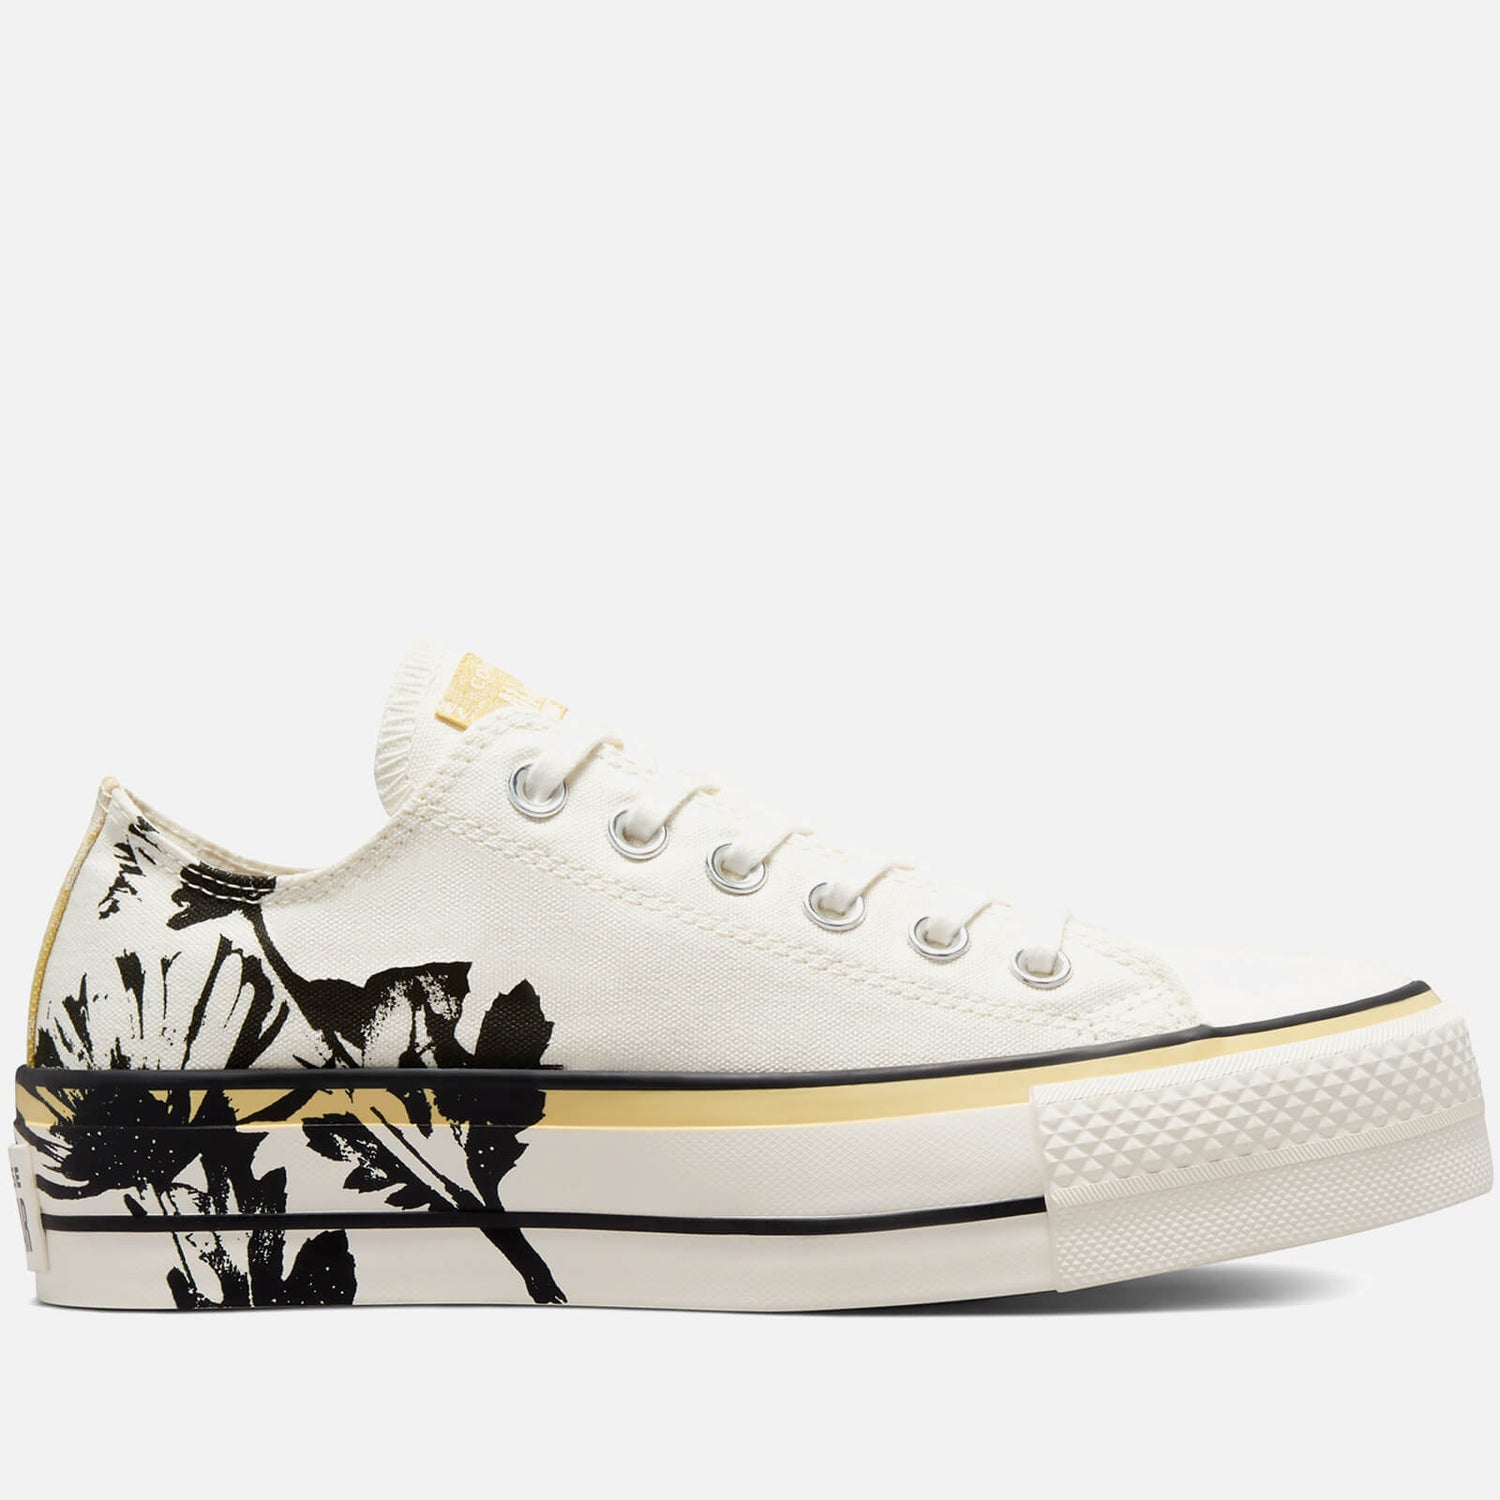 Converse Women's Chuck Taylor All Star Hybrid Floral Lift Ox Trainers - Egret/Saturn Gold/Black